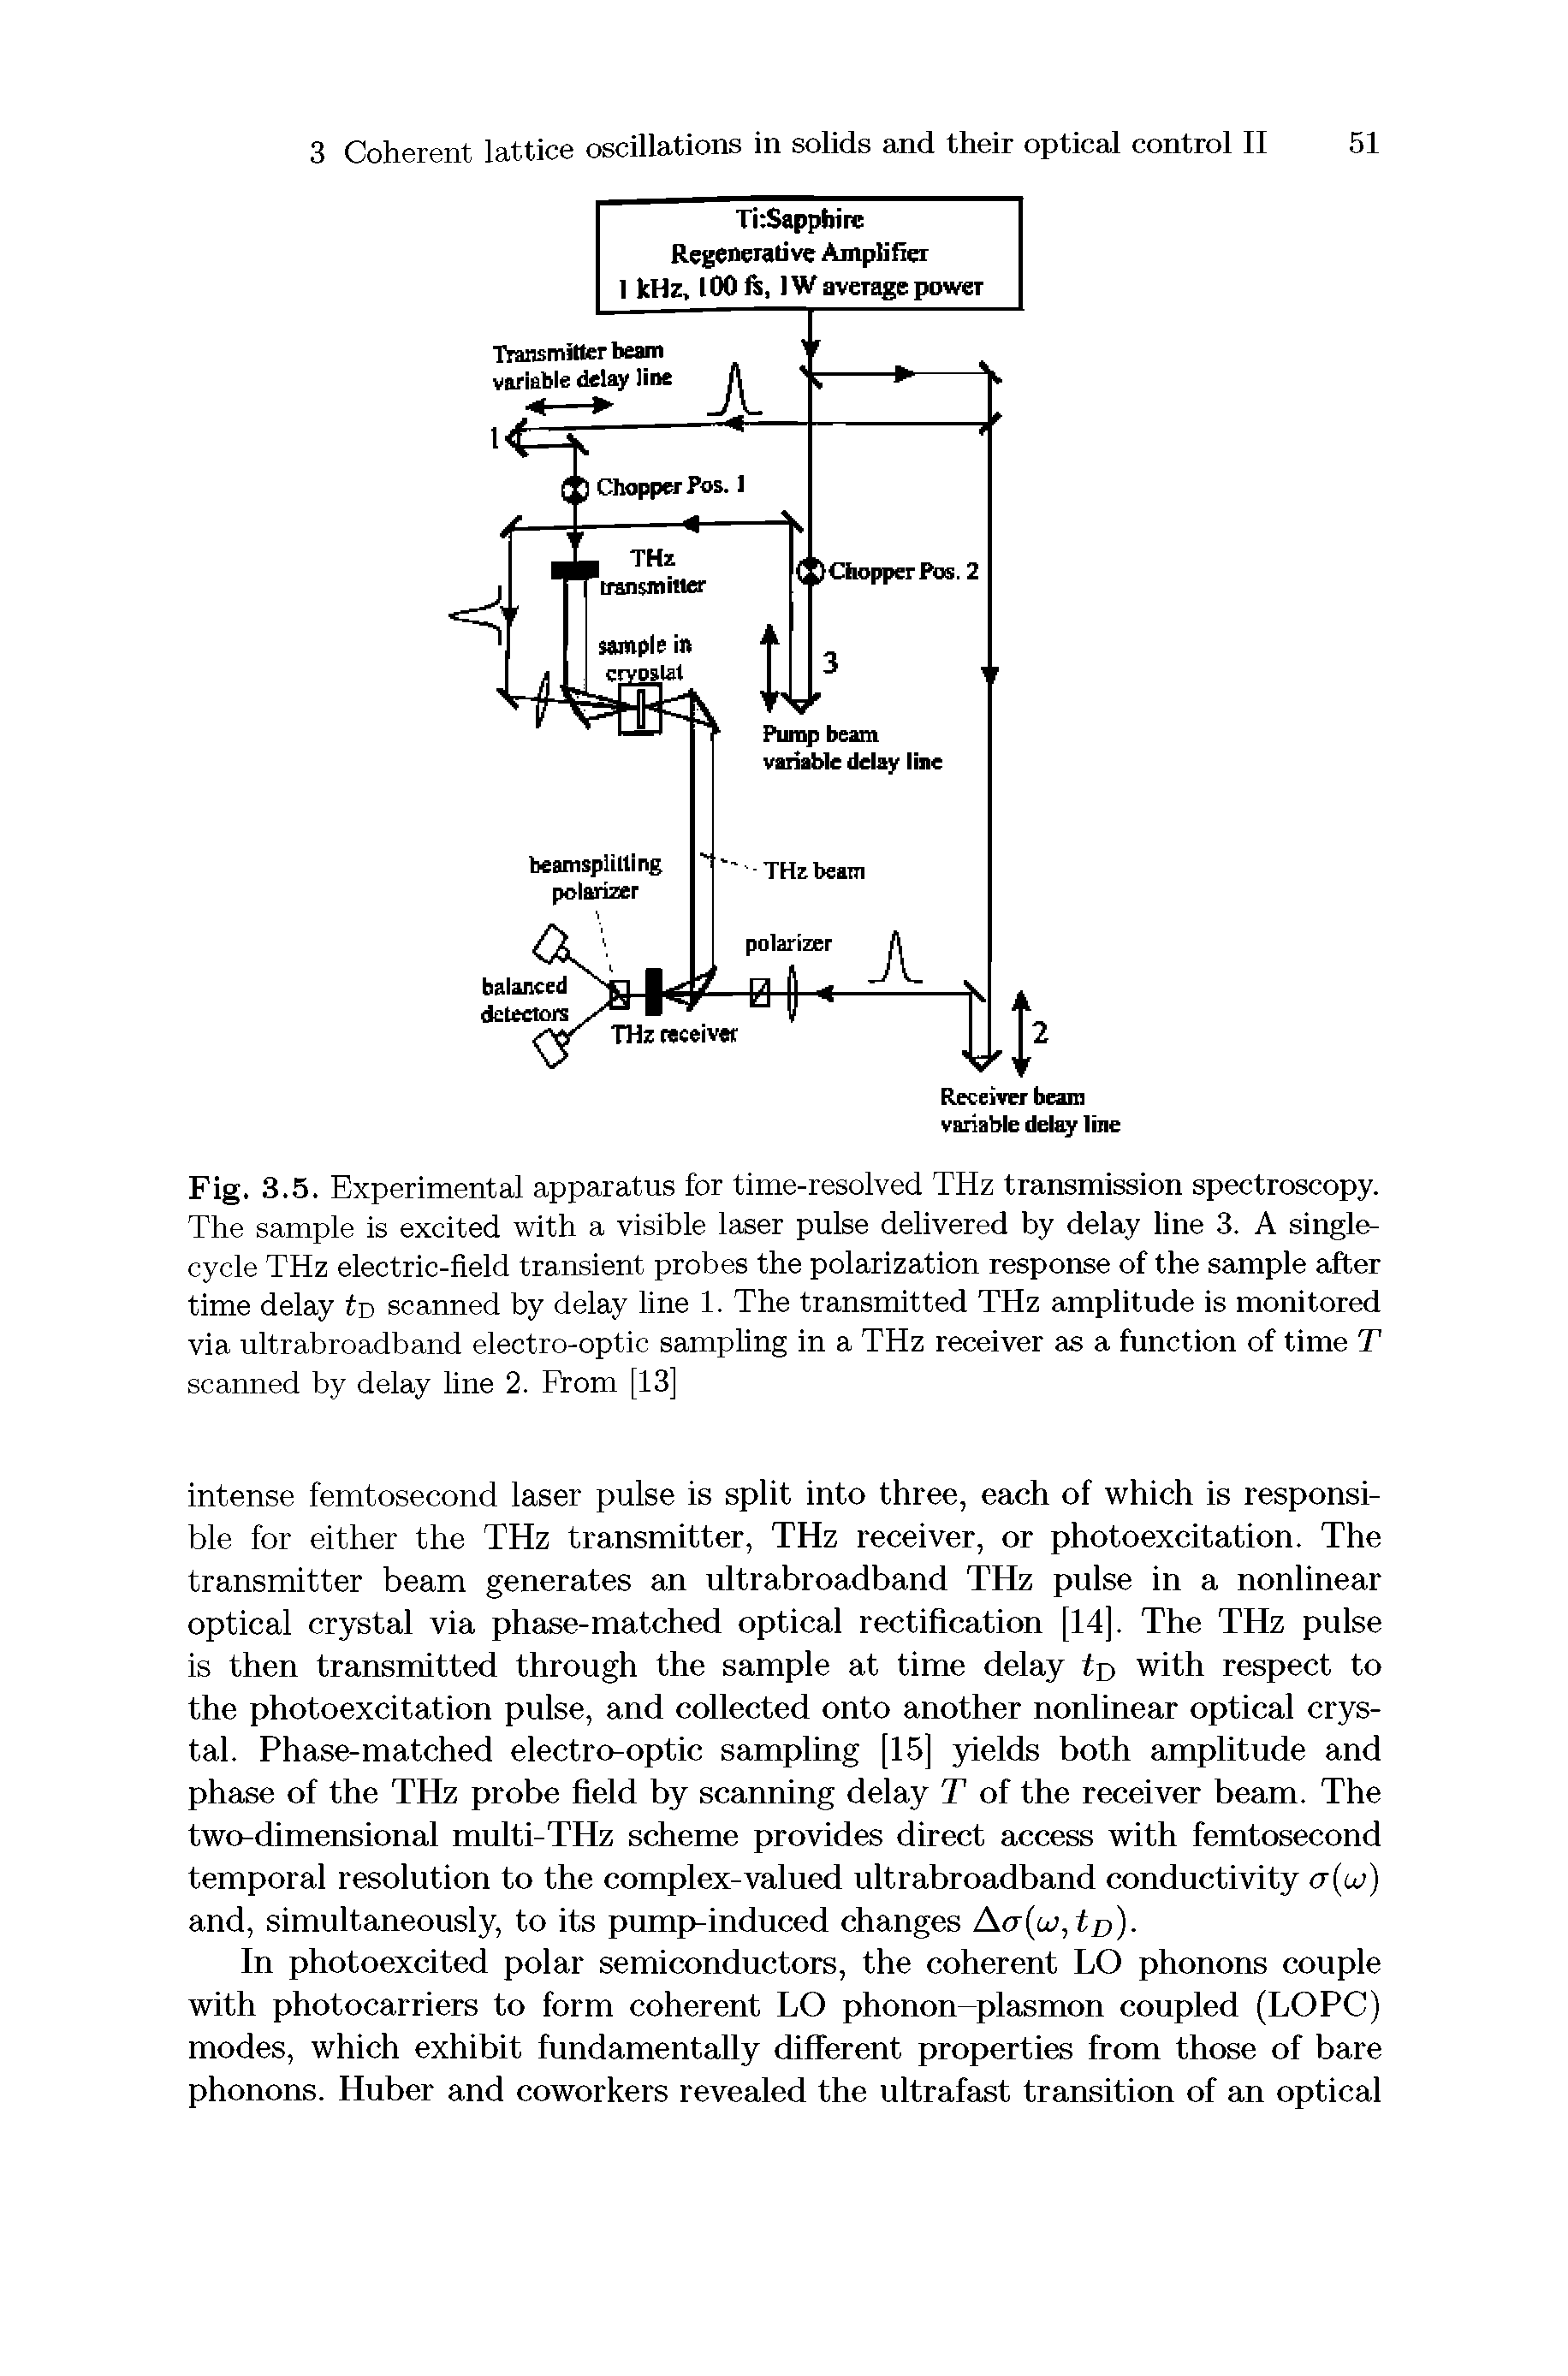 Fig. 3.5. Experimental apparatus for time-resolved THz transmission spectroscopy. The sample is excited with a visible laser pulse delivered by delay line 3. A singlecycle THz electric-field transient probes the polarization response of the sample after time delay tv scanned by delay line 1. The transmitted THz amplitude is monitored via ultrabroadband electro-optic sampling in a THz receiver as a function of time T scanned by delay line 2. From [13]...